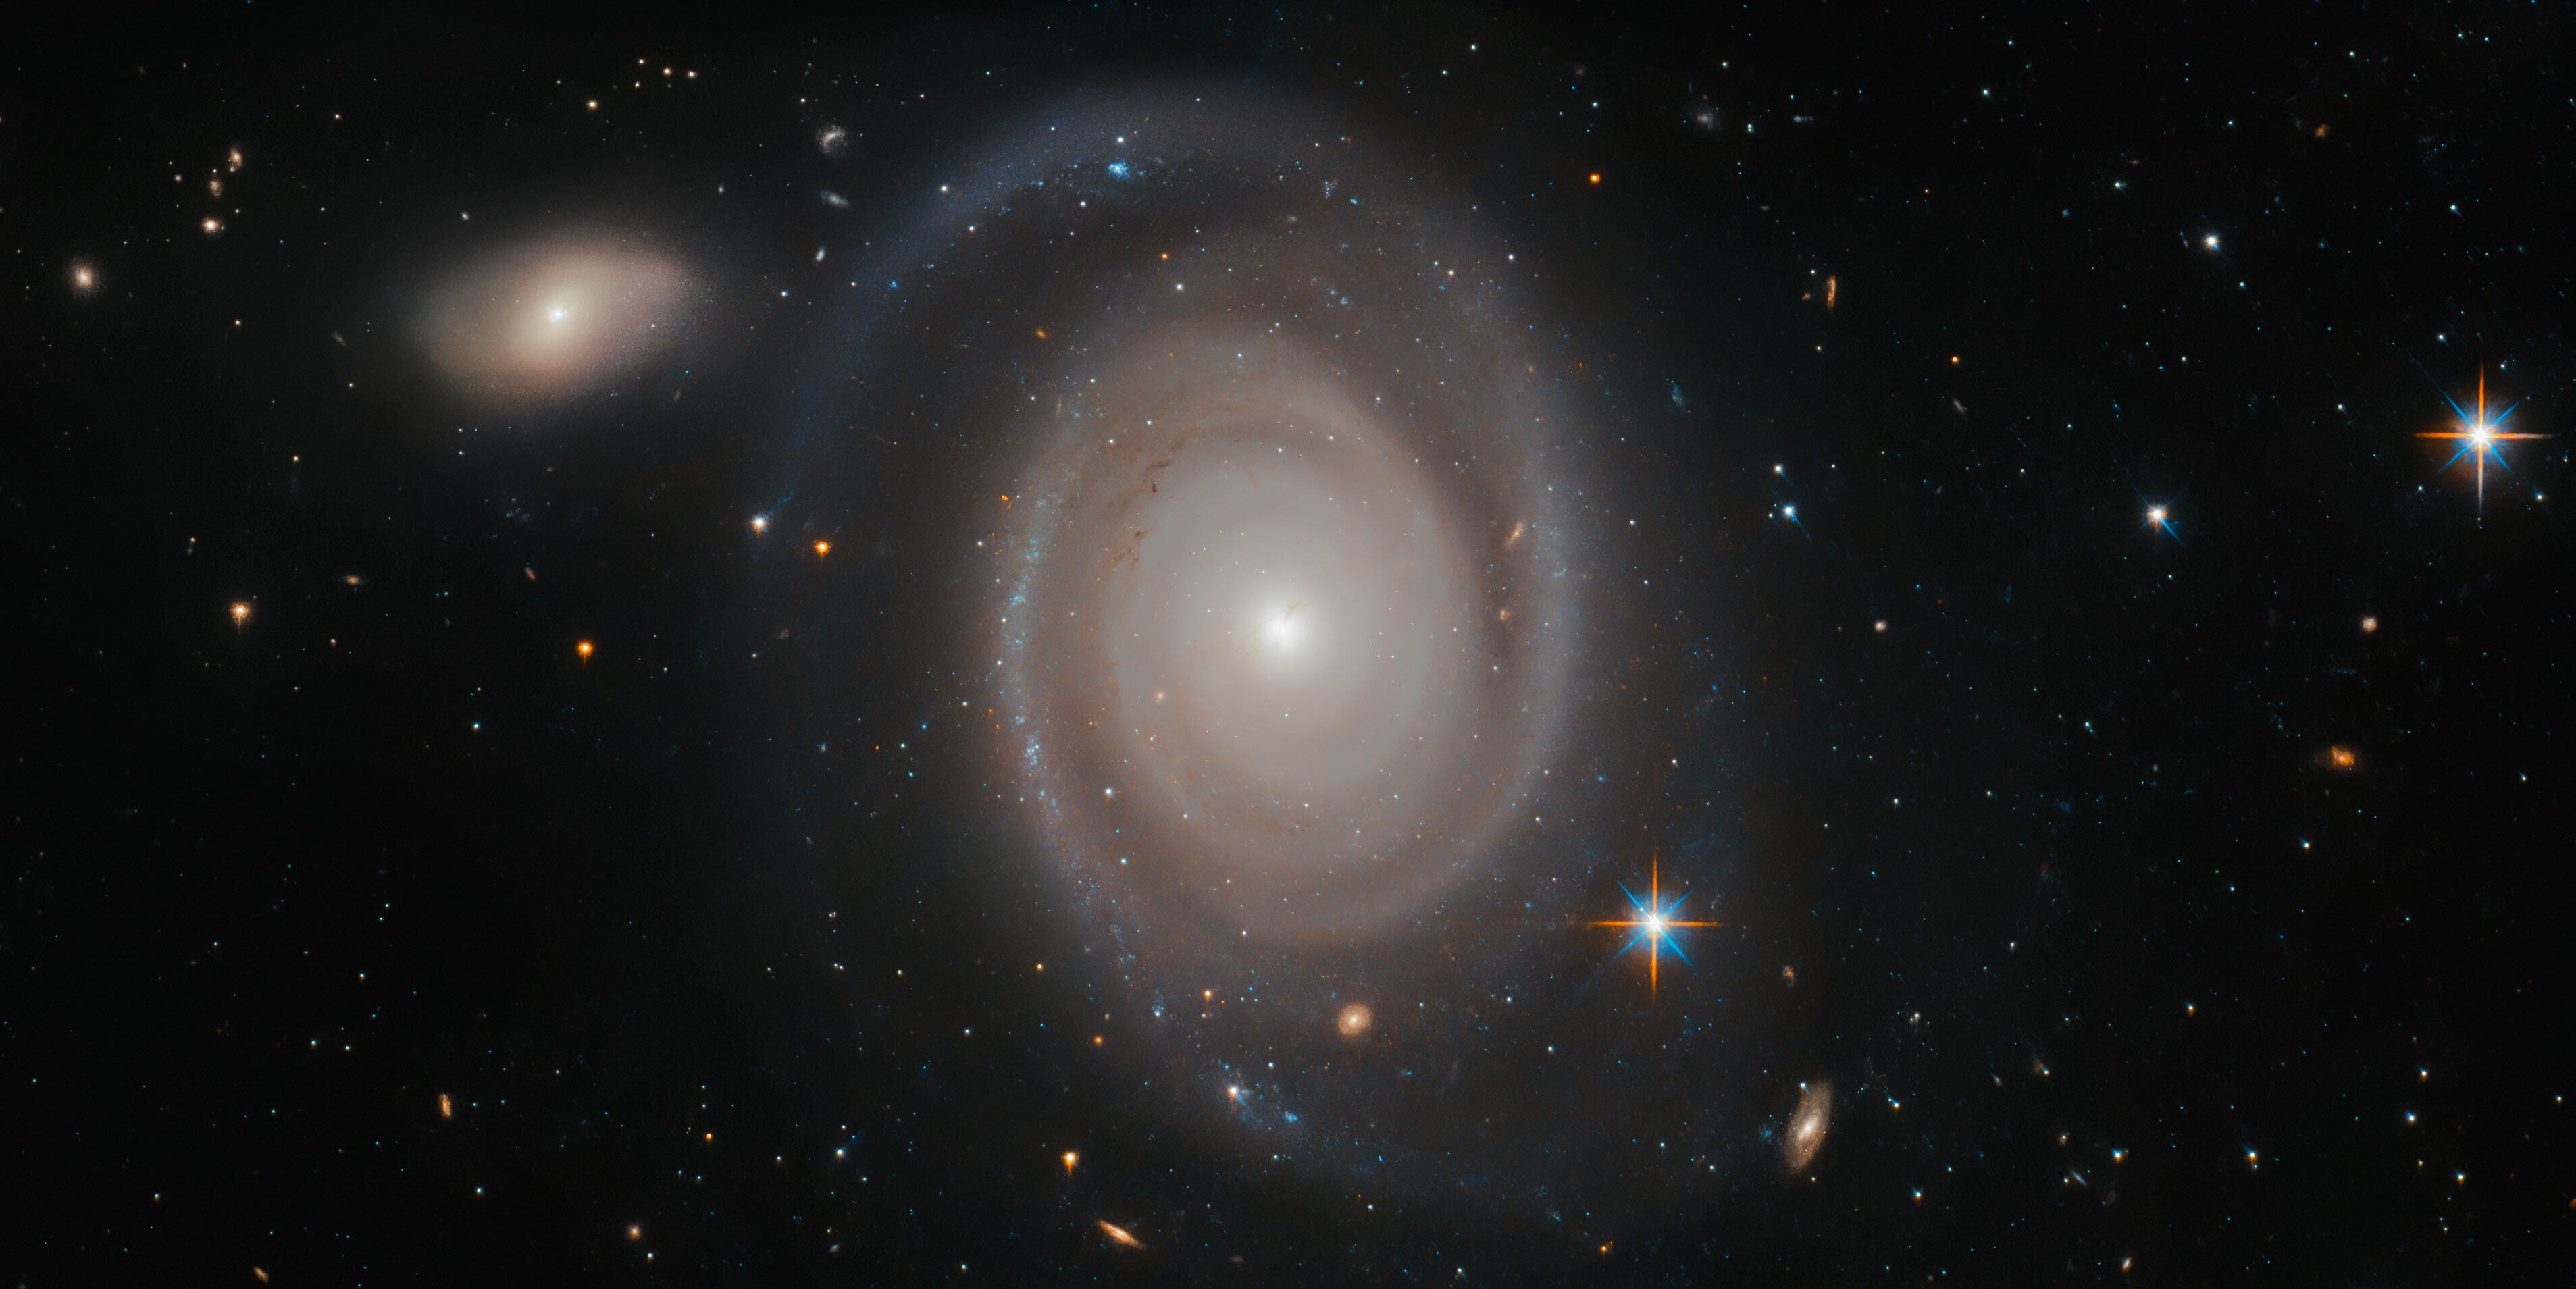 Hubble Space Telescope Spots a Galaxy – And It’s Not Alone